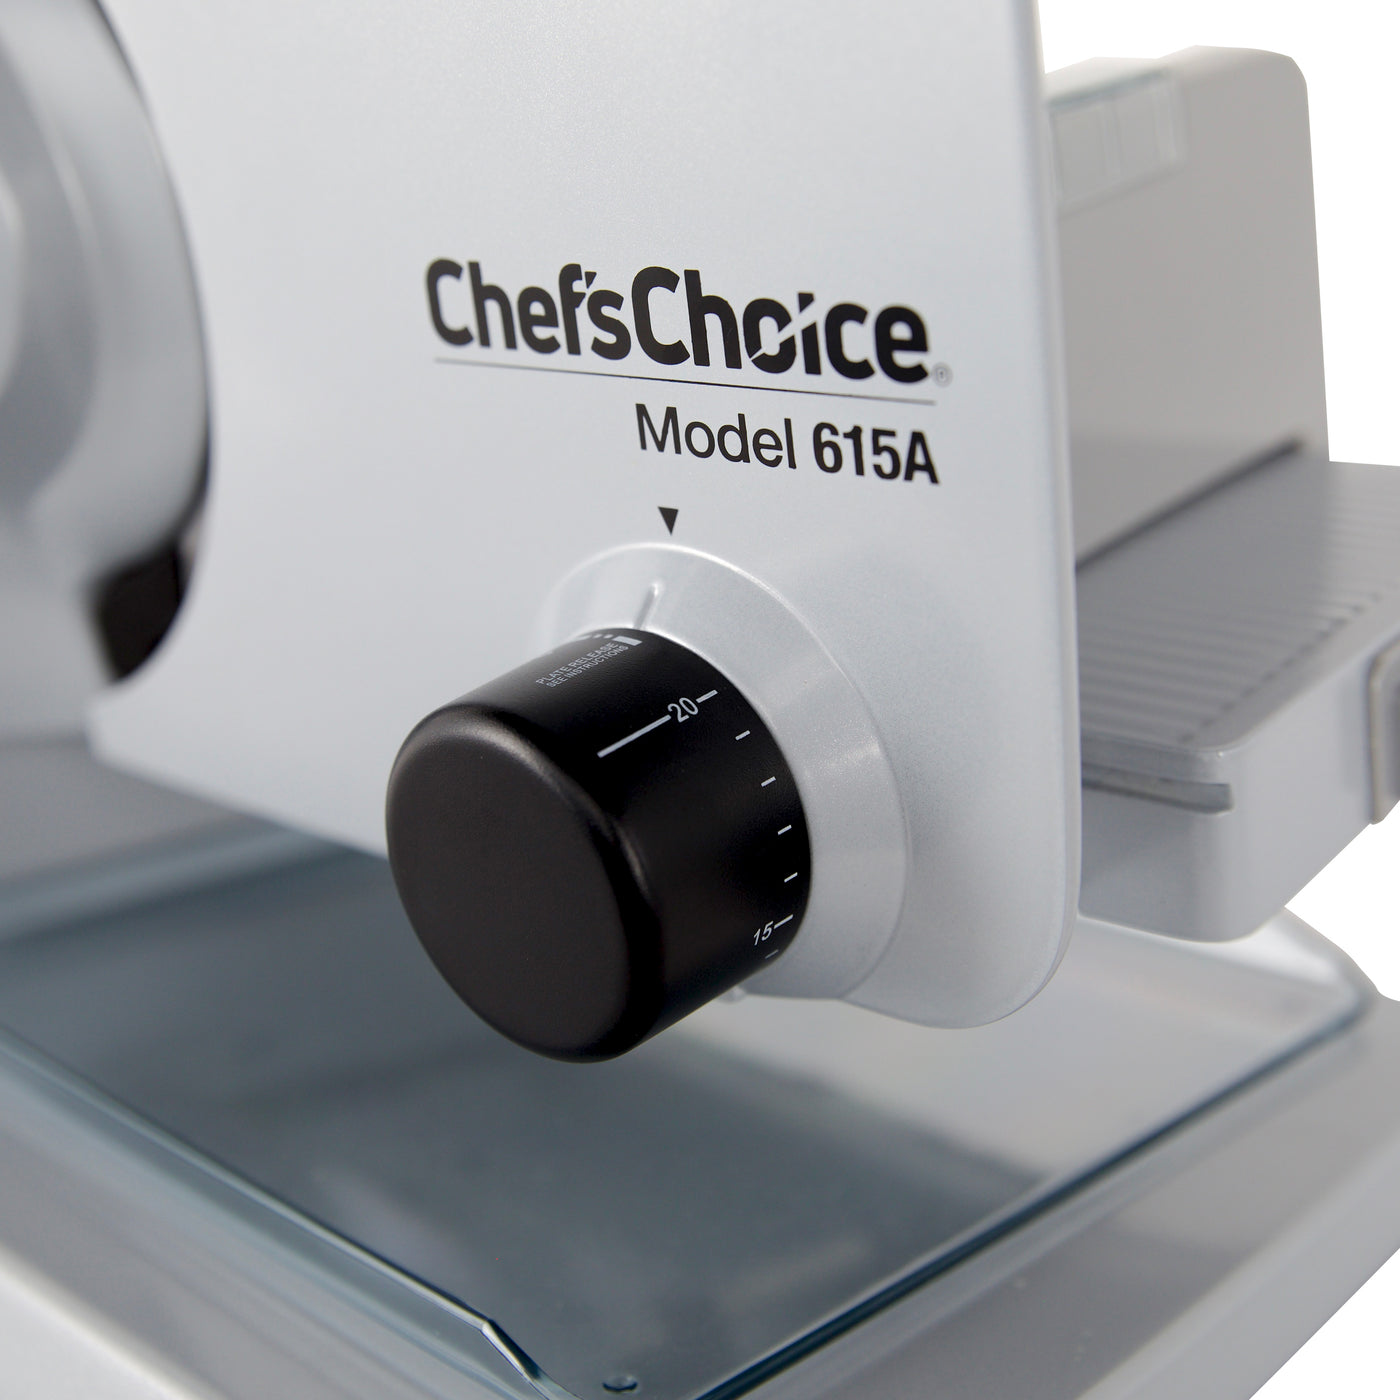 Chef's Choice 615 Electric Food Slicer